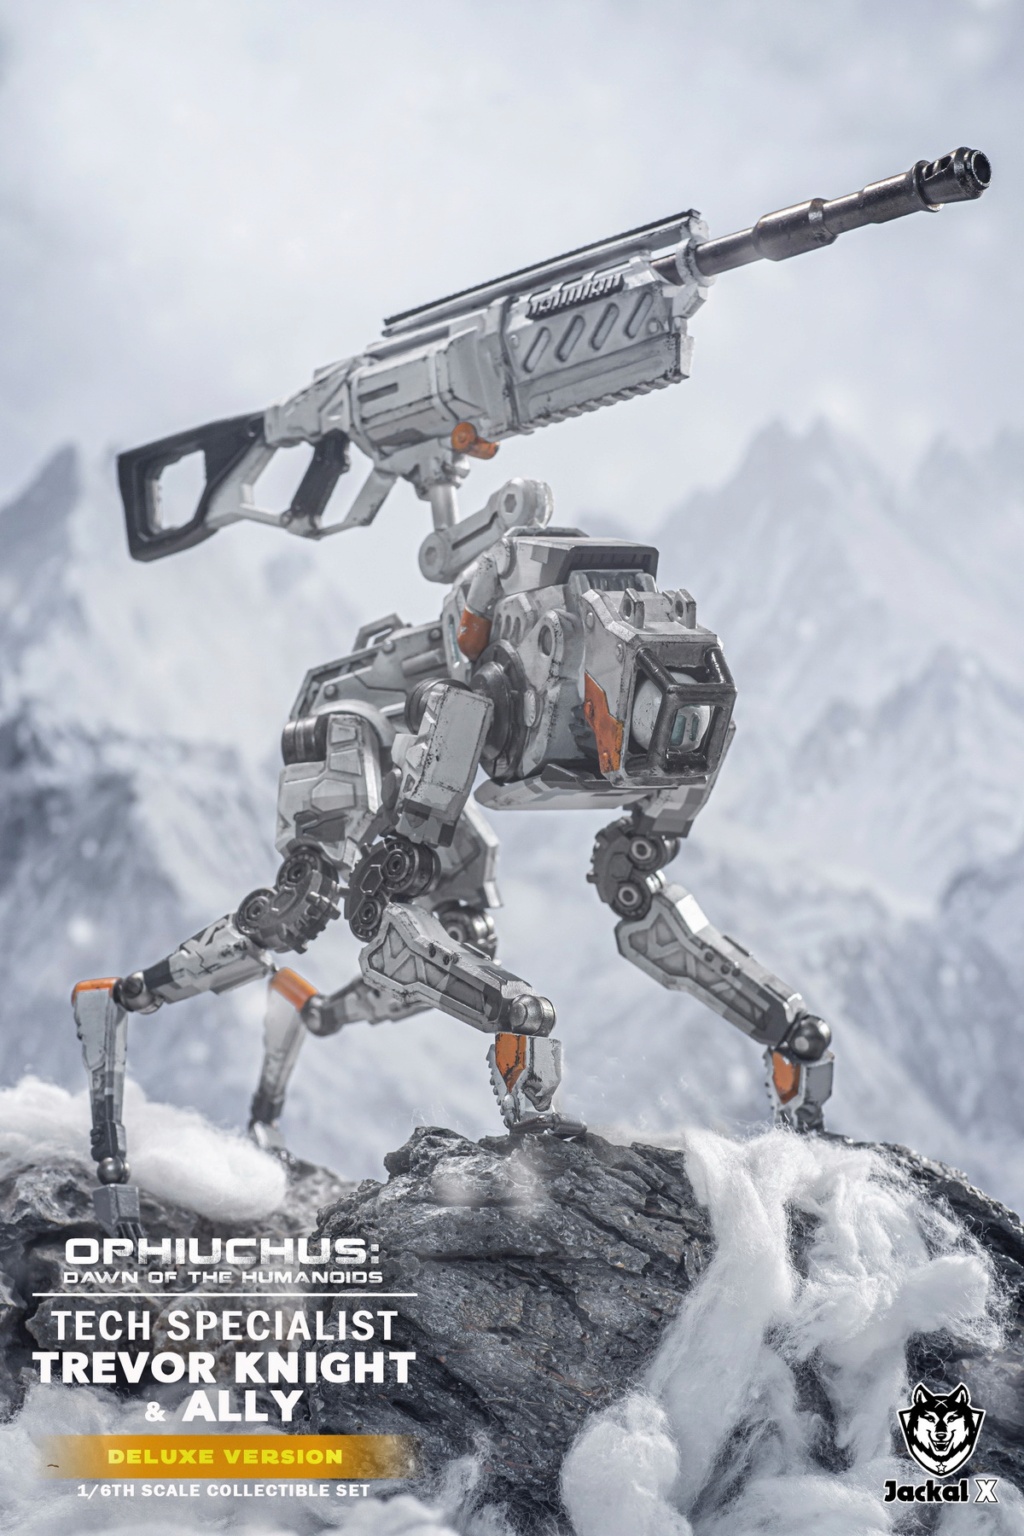 TechSpecialist - NEW PRODUCT: JackalX: JX014 1/6 Scale Tech Specialist Trevor Knight & Ally action figures 17064811